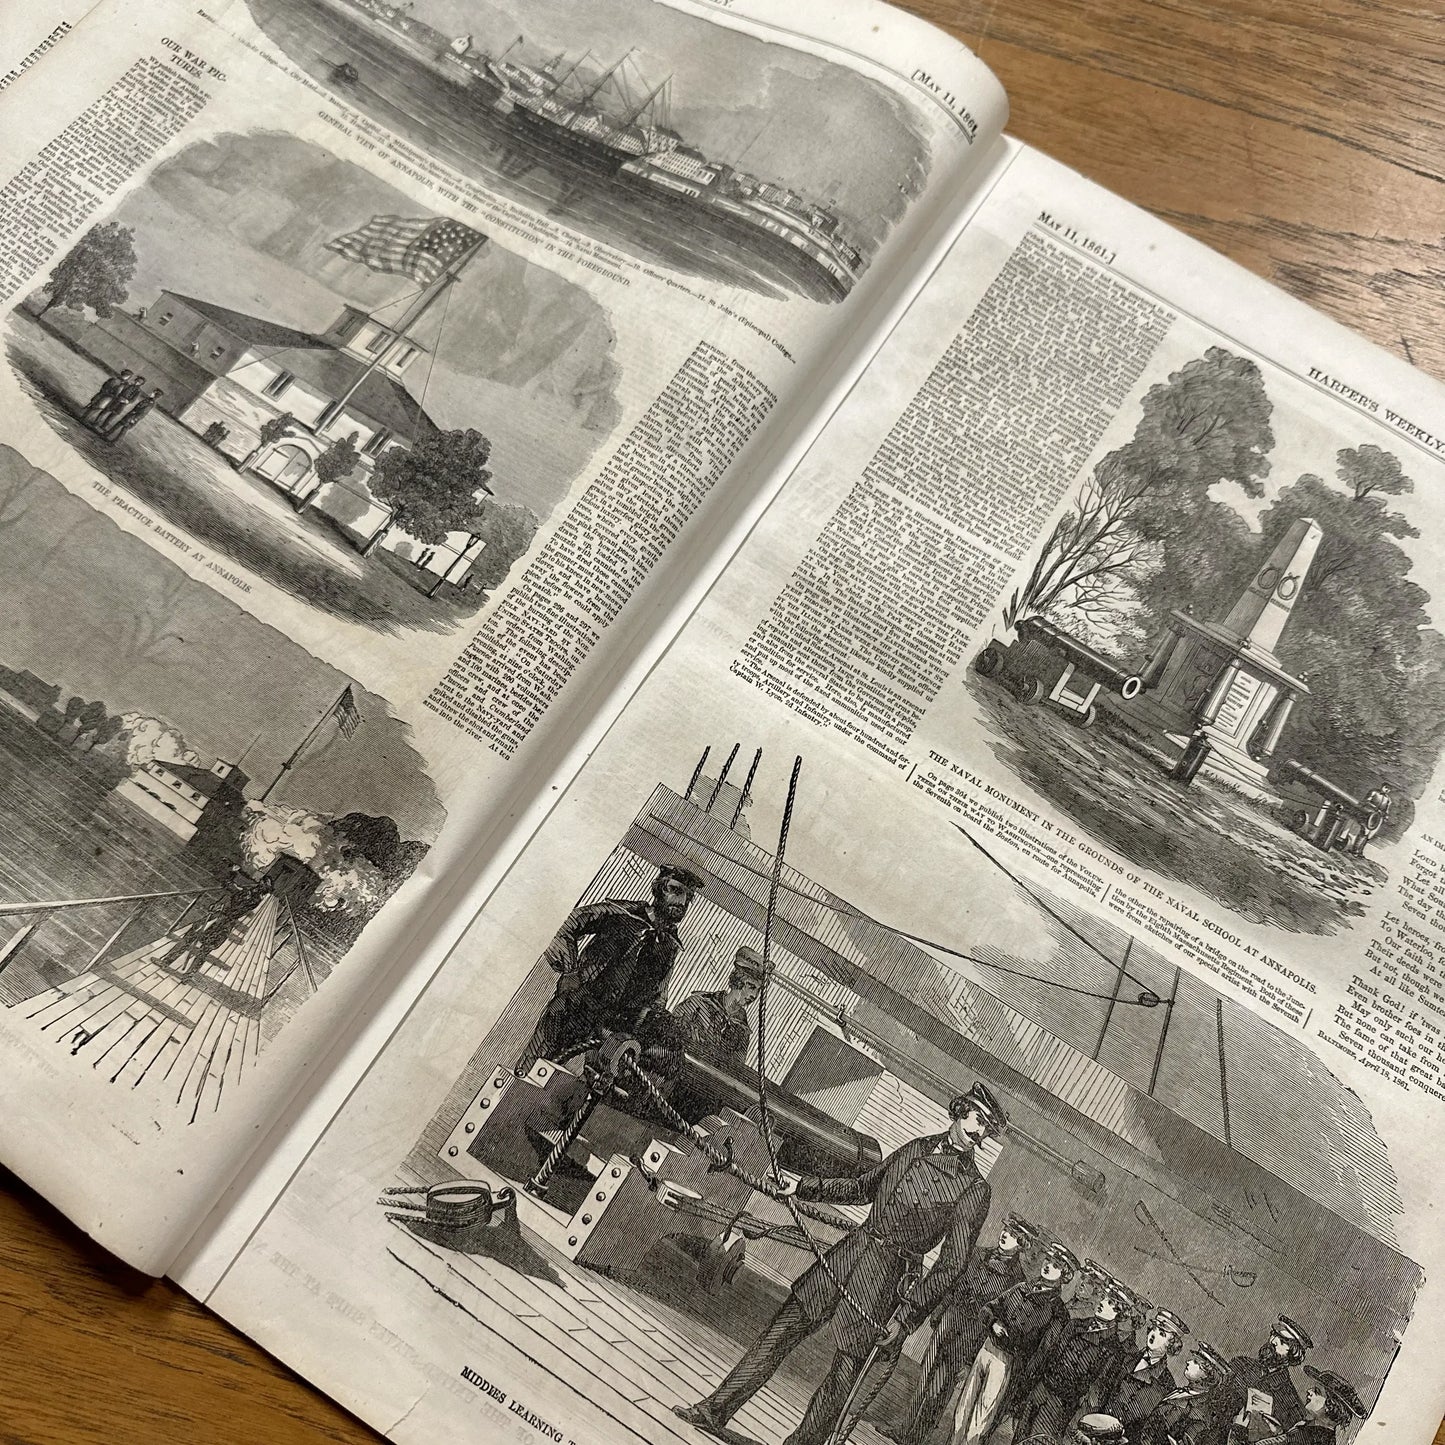 "Harper's Weekly" for May 11, 1861 with a large illustration of the 69th Irish regiment embarking on USS James Adger for the war